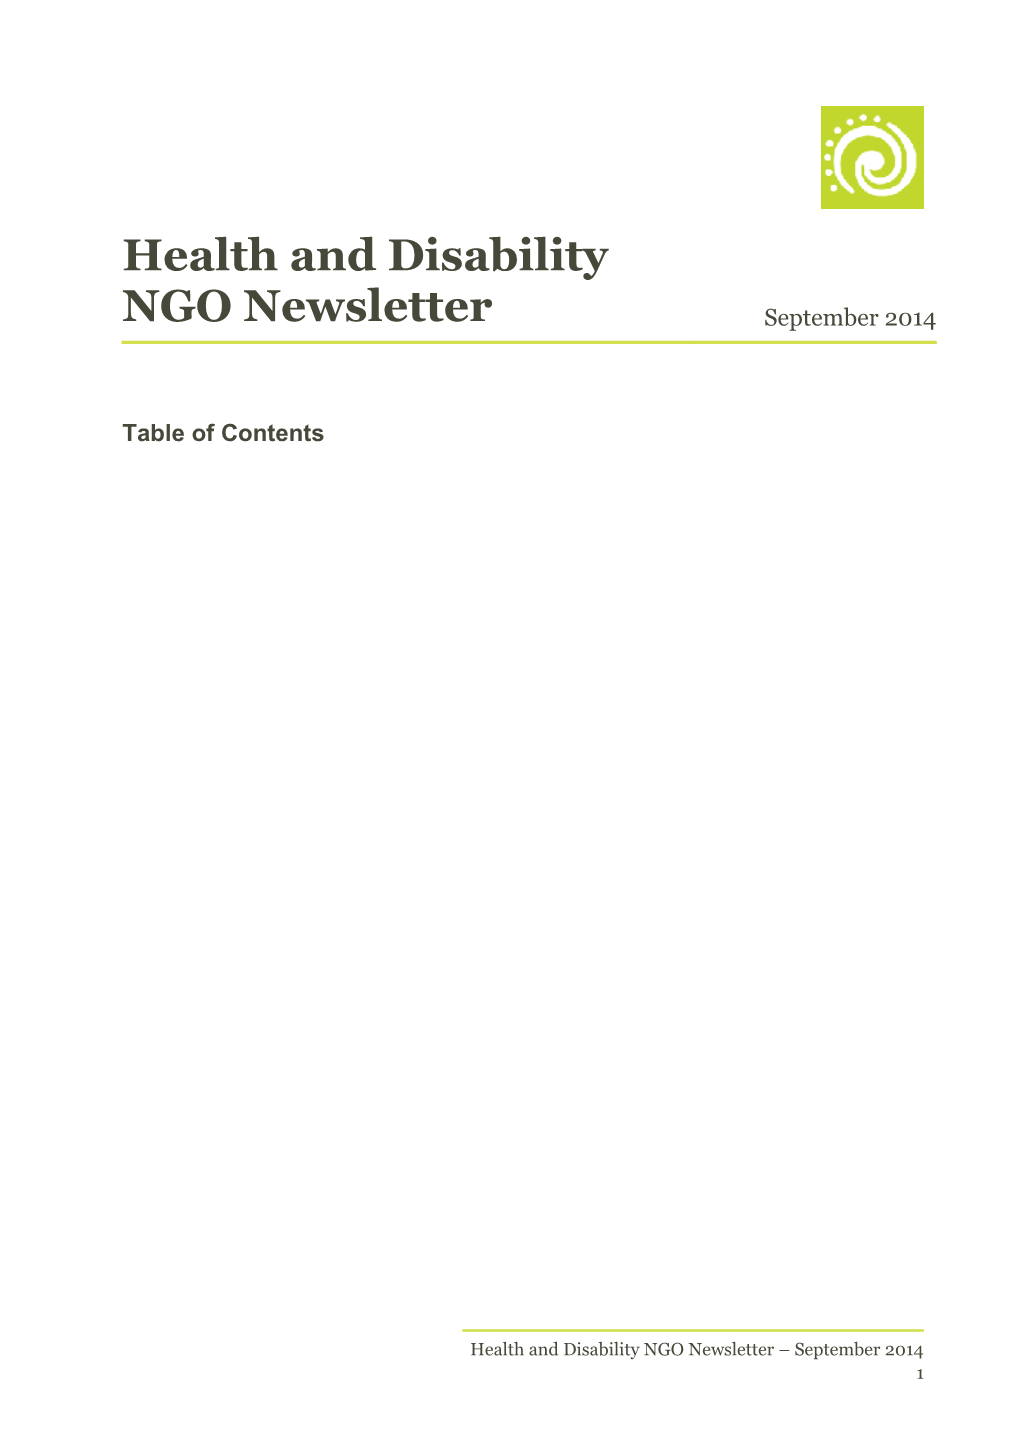 Health And Disability NGO Newsletter - August 2014